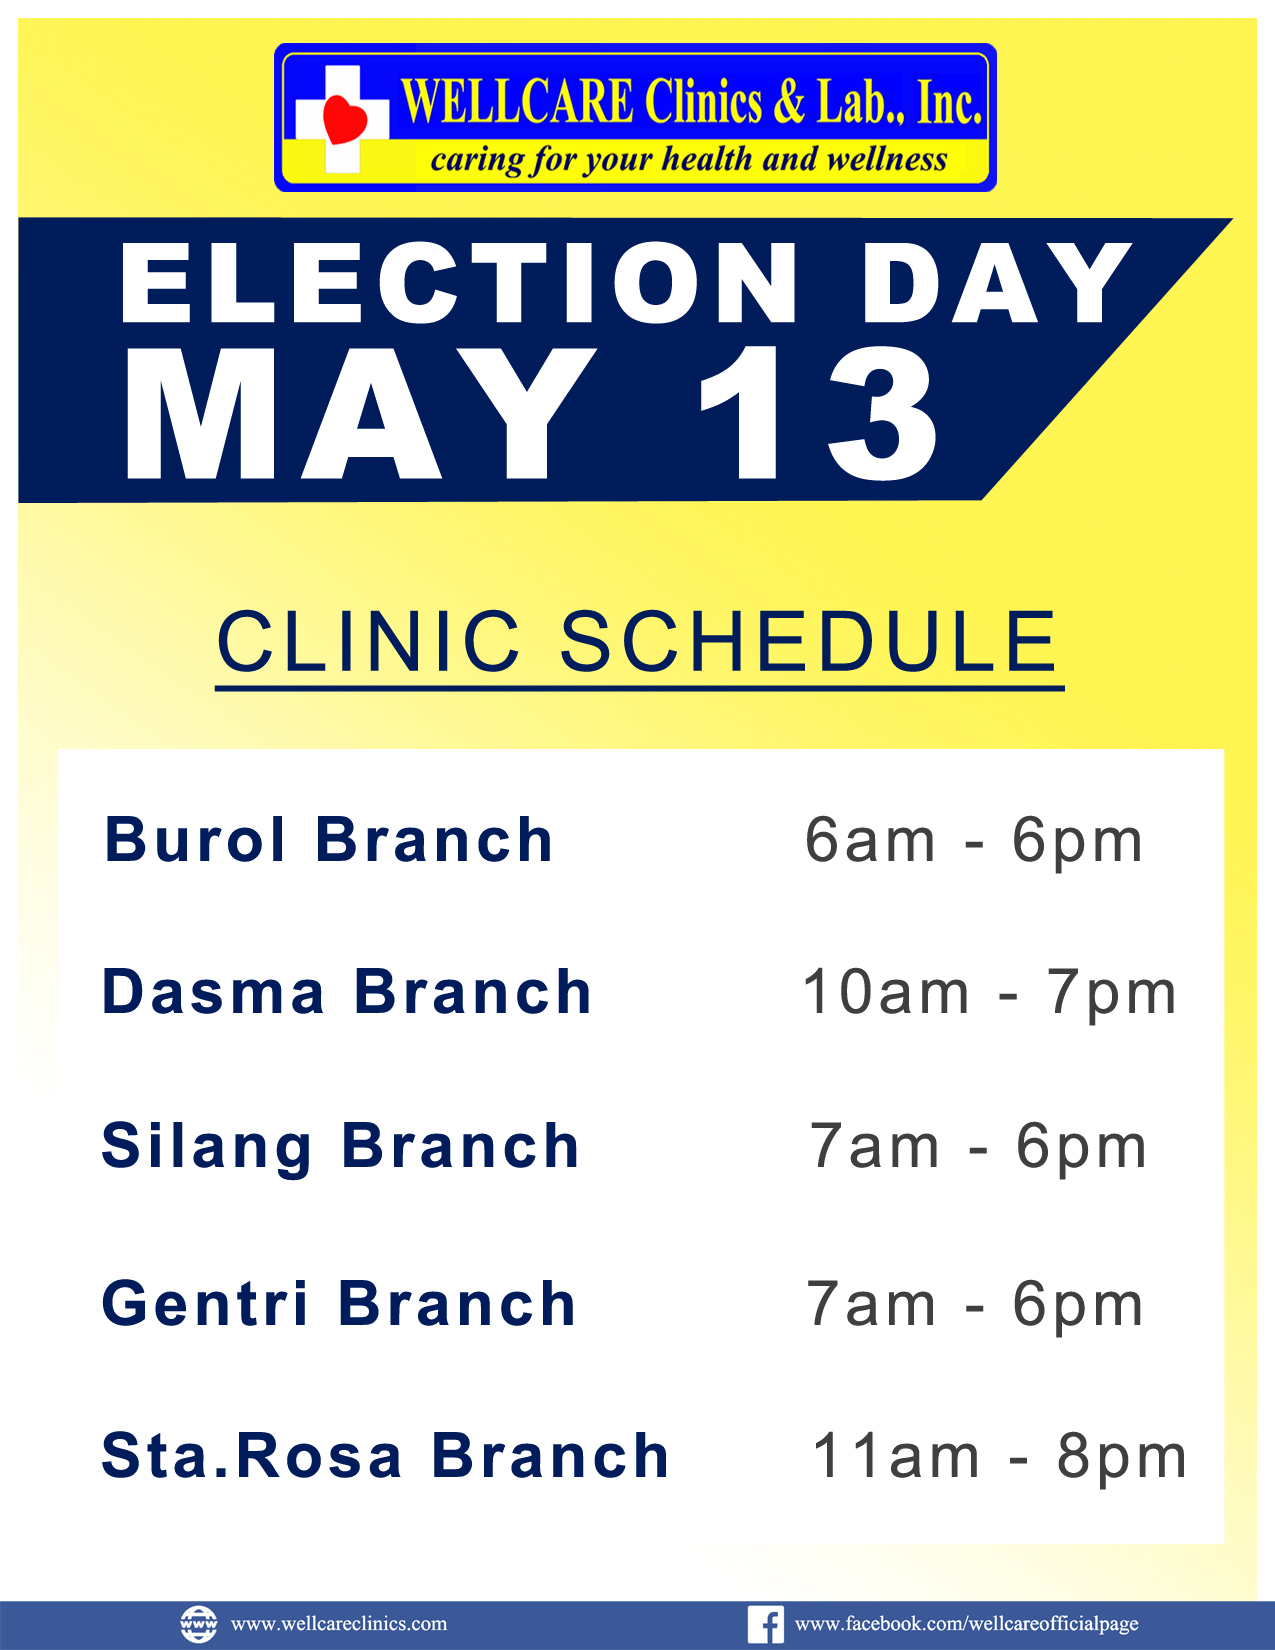 Wellcare clinics & Lab schedule for ELECTION DAY (May 13, 2019) #IAMWELLCARE "Caring for your Health & Wellness!" #ThinkHealth #ThinkWellness #ThinkWellcare For more Information, Please call or text us at: Burol (046) 416-6529 0933.8204078 Dasma (046) 450-5116 0933.8204079 Gentri (046) 476-0733 0933.8204080 Silang (046) 687-7792 0925.5505780 StaRosa (049) 576-0010 0933.8204081